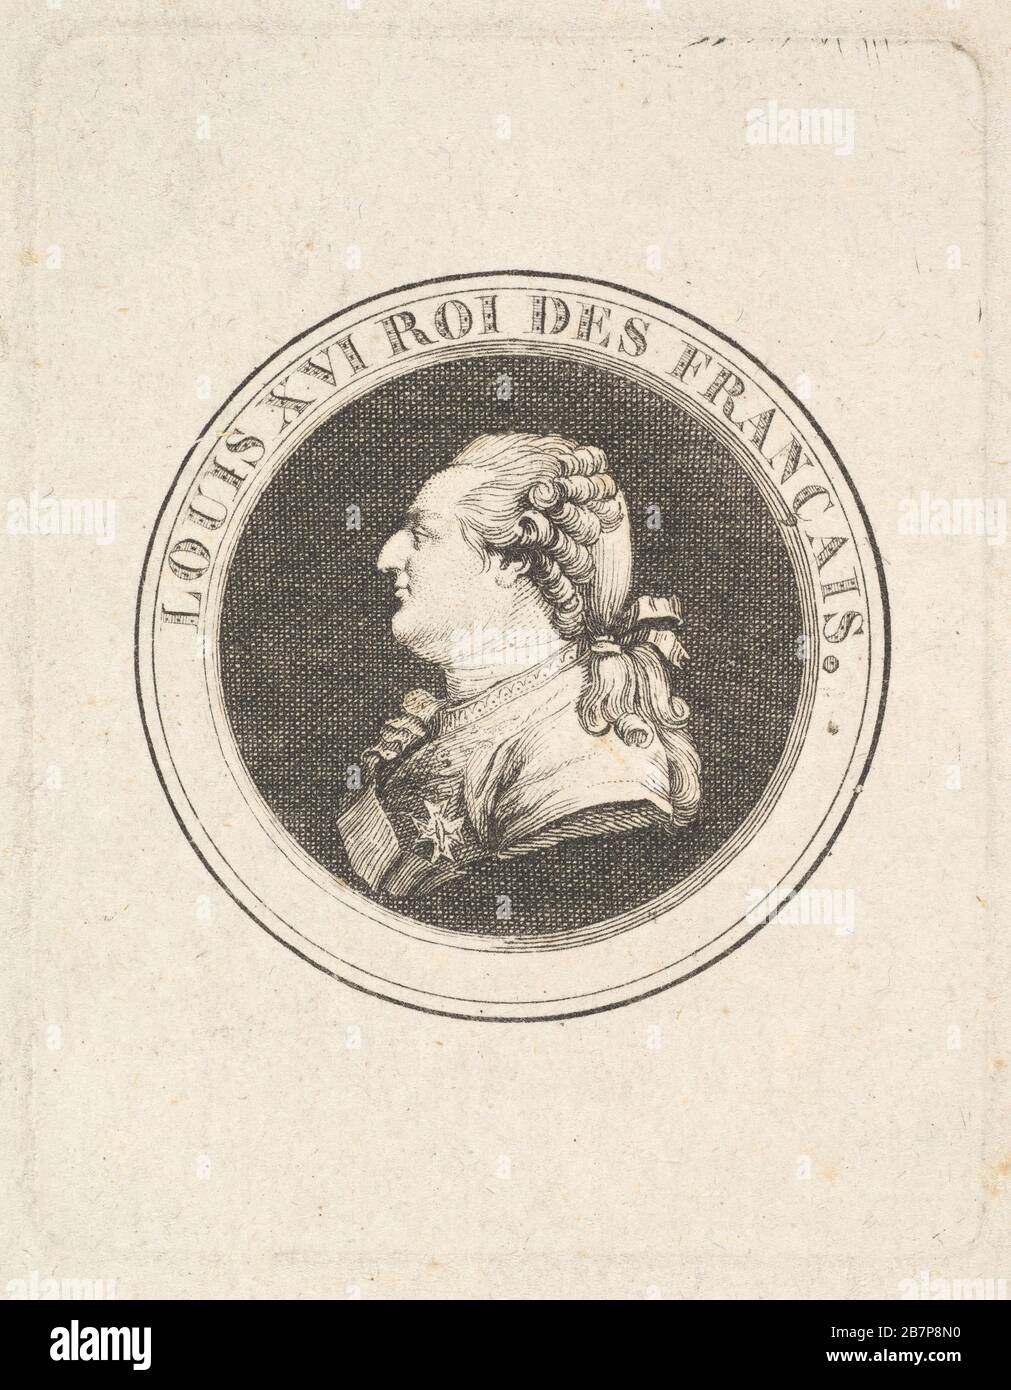 Print of a Portrait Medal of Louis XVI, possibly 1789-90. Attributed to Augustin de Saint-Aubin Stock Photo